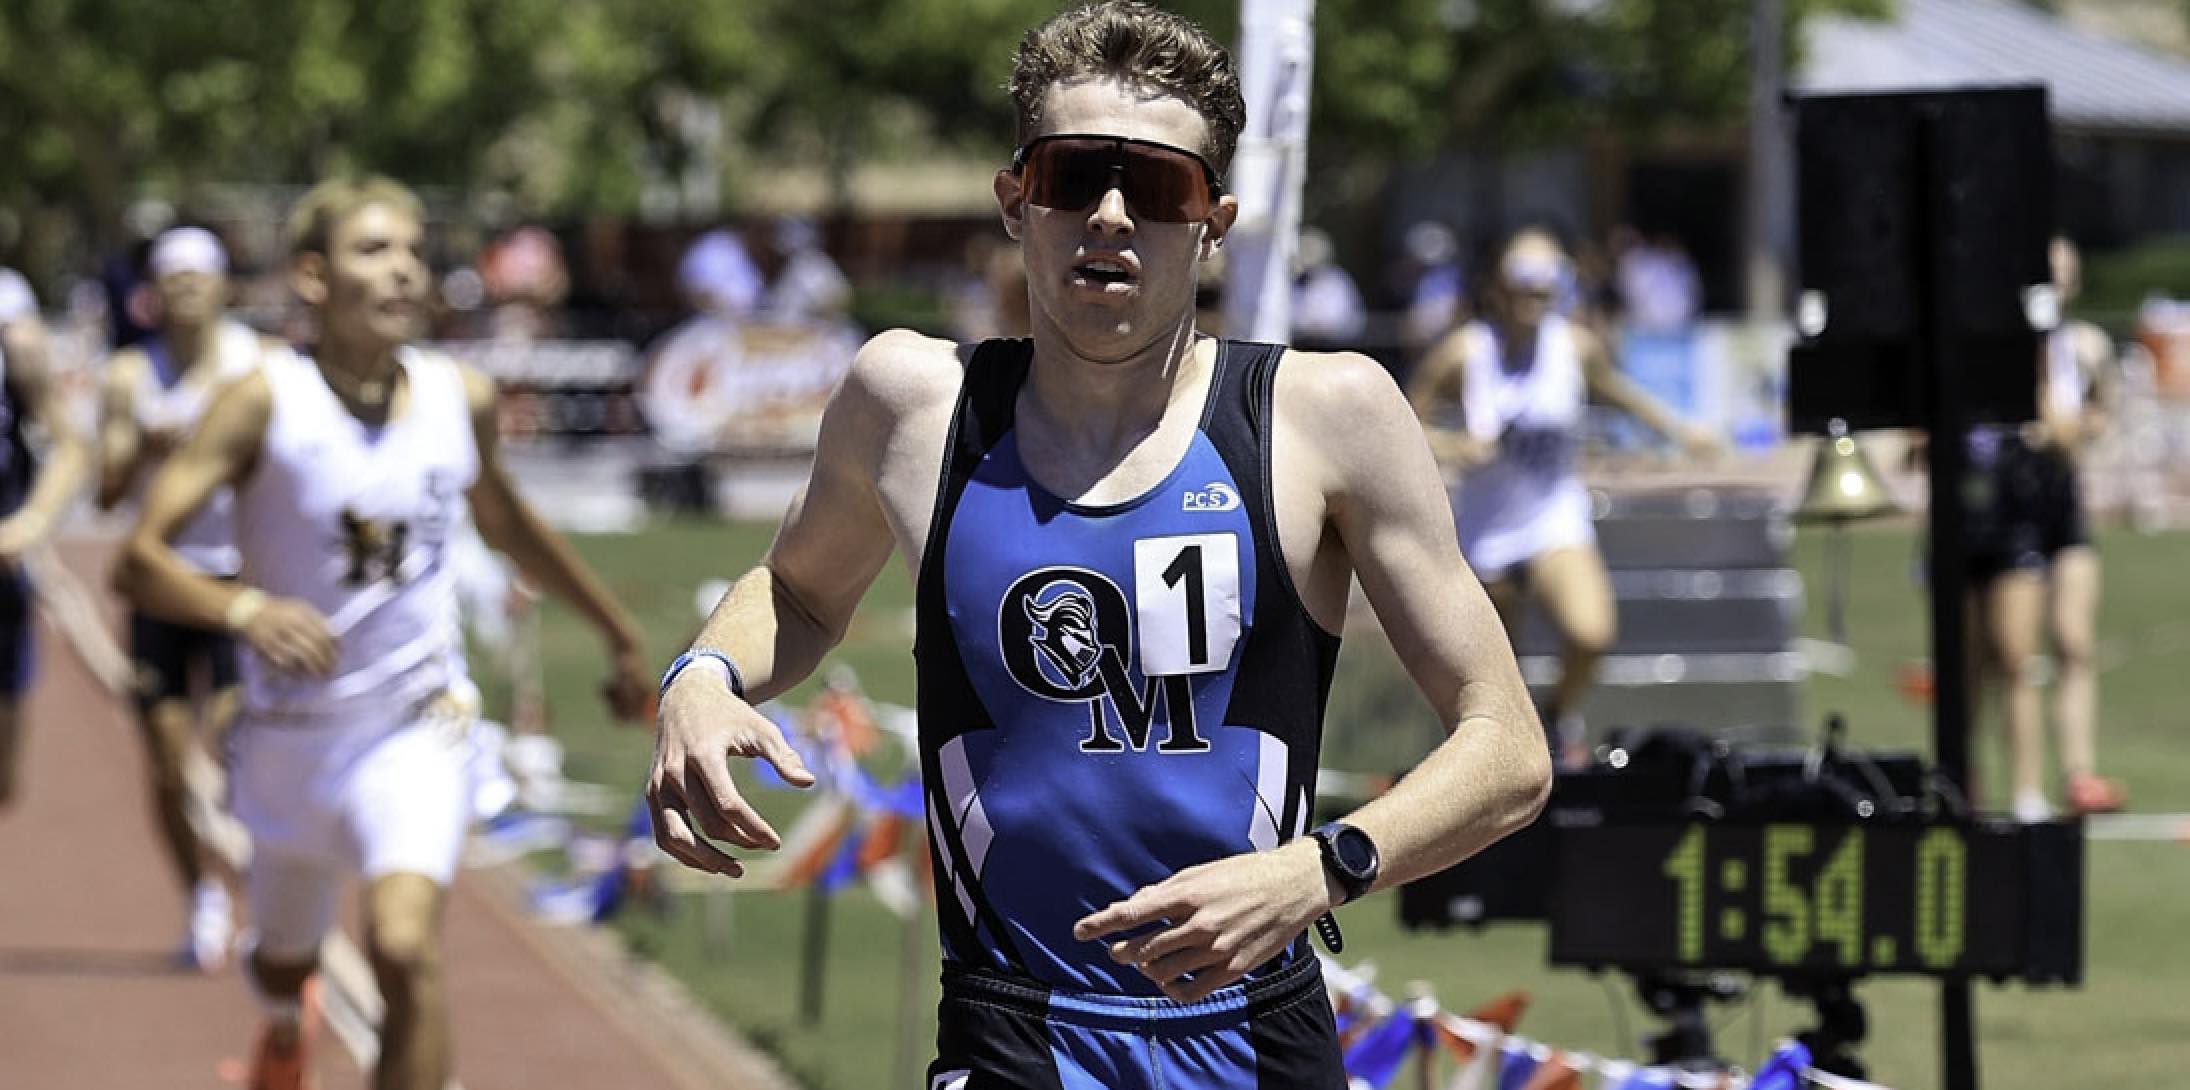 ORGAN MOUNTAIN HIGH SCHOOL STUDENT-ATHLETE NAMED GATORADE NEW MEXICO BOYS TRACK & FIELD PLAYER OF THE YEAR